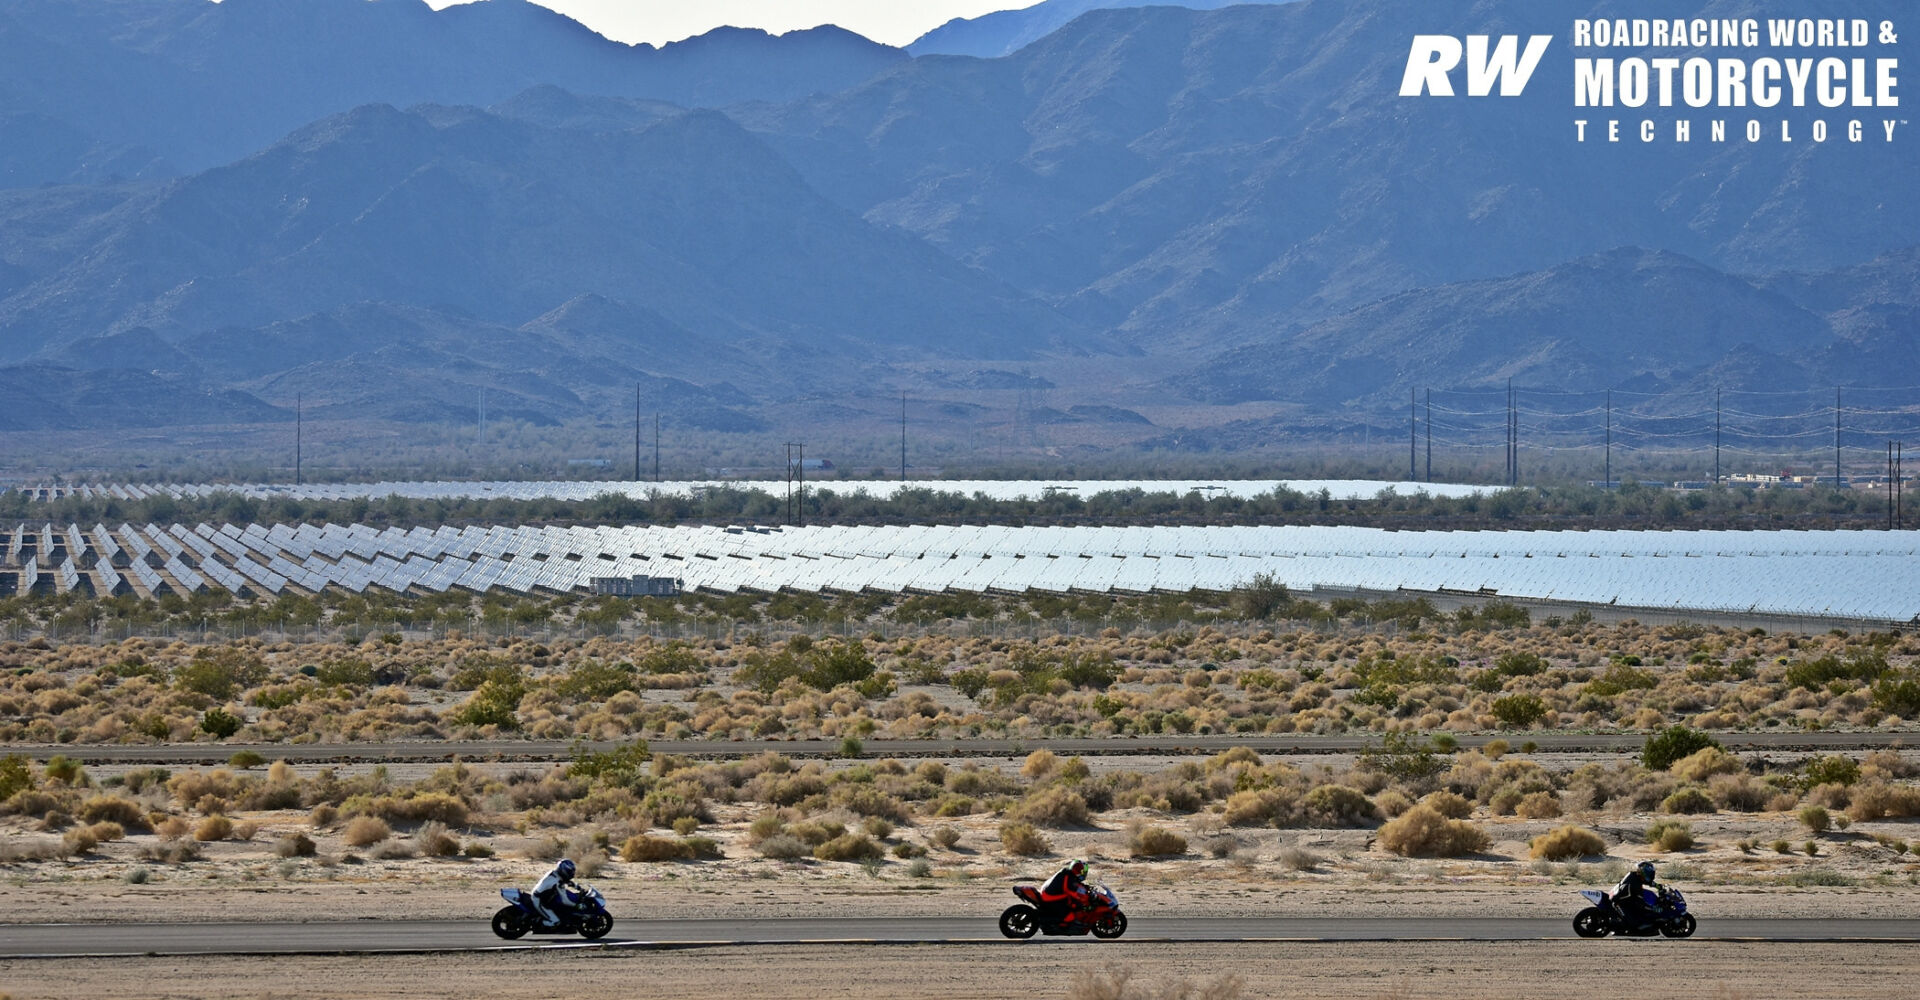 Riders at a track day at Chuckwalla Valley Raceway against a backdrop of a vast array of solar panels. With solar power generation on the rise, these land uses are compatible with racetracks and can protect them from the encroachment of developments that are not friendly to circuits. Photo by Michael Gougis.